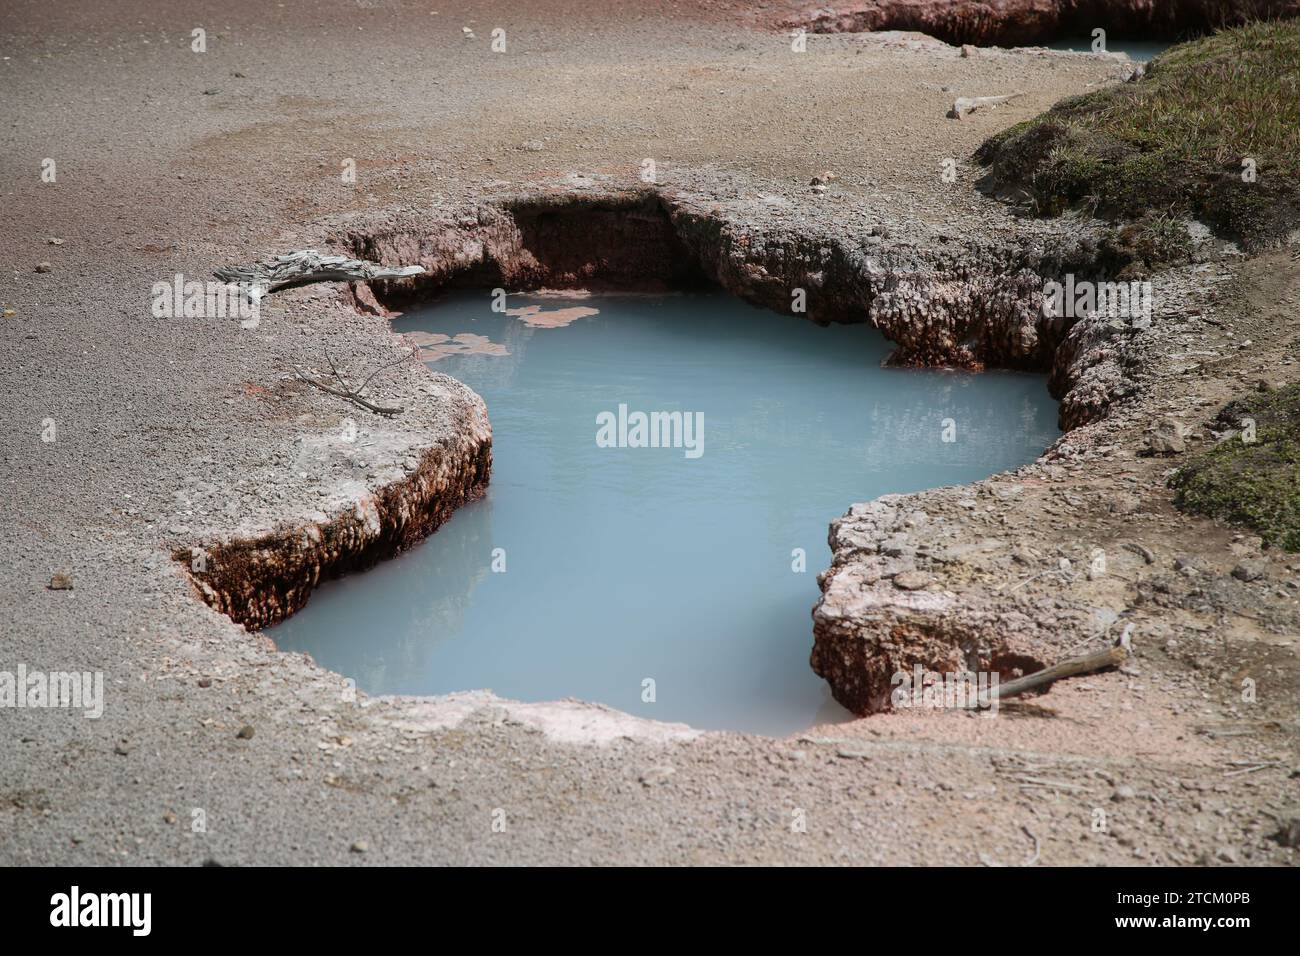 Hot pool in Yellowstone National Park Stock Photo